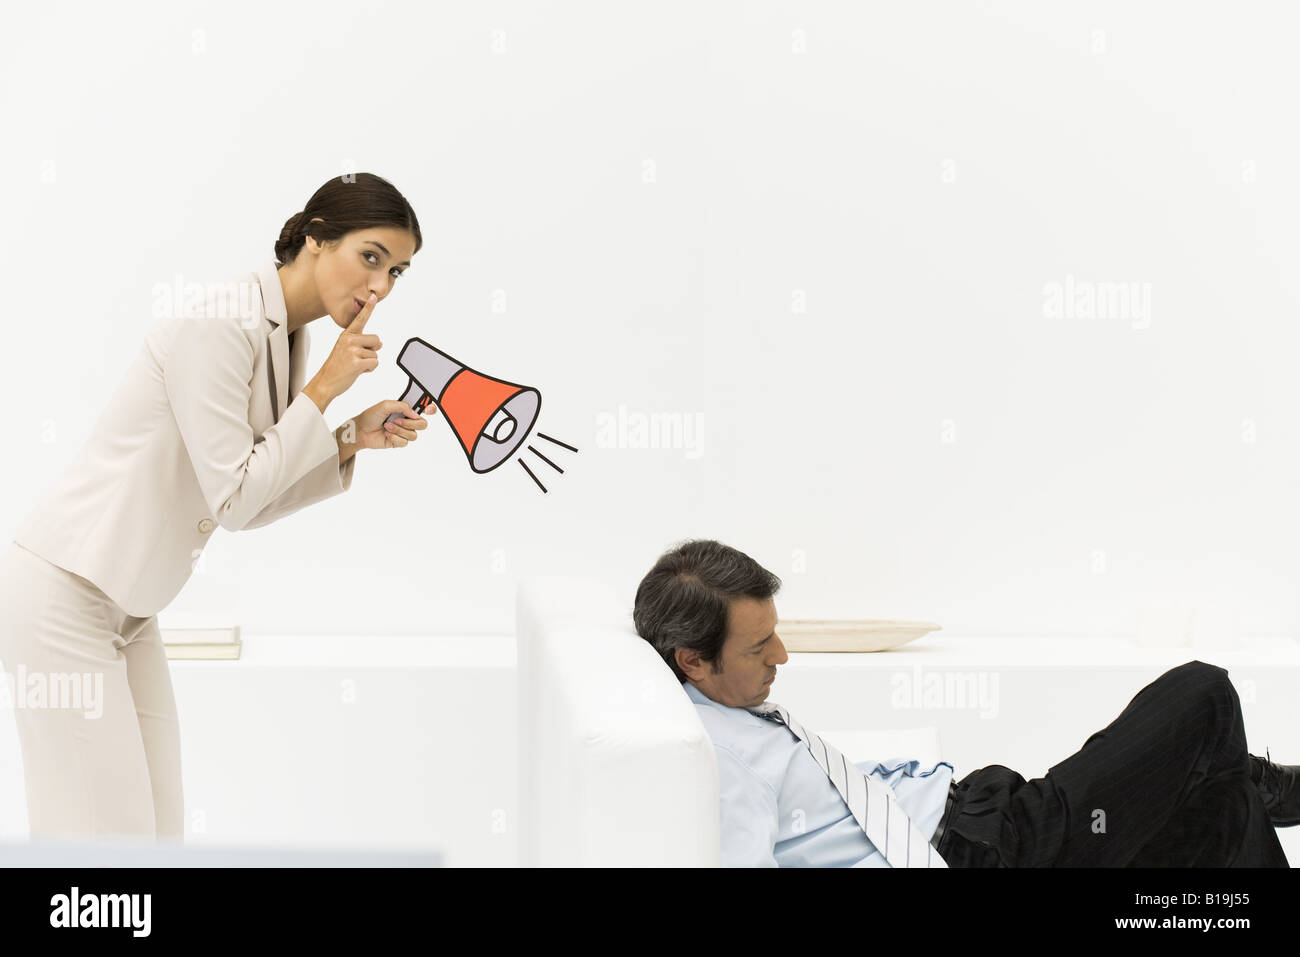 Man sleeping in chair, woman behind him holding megaphone, looking at camera, finger over lips Stock Photo